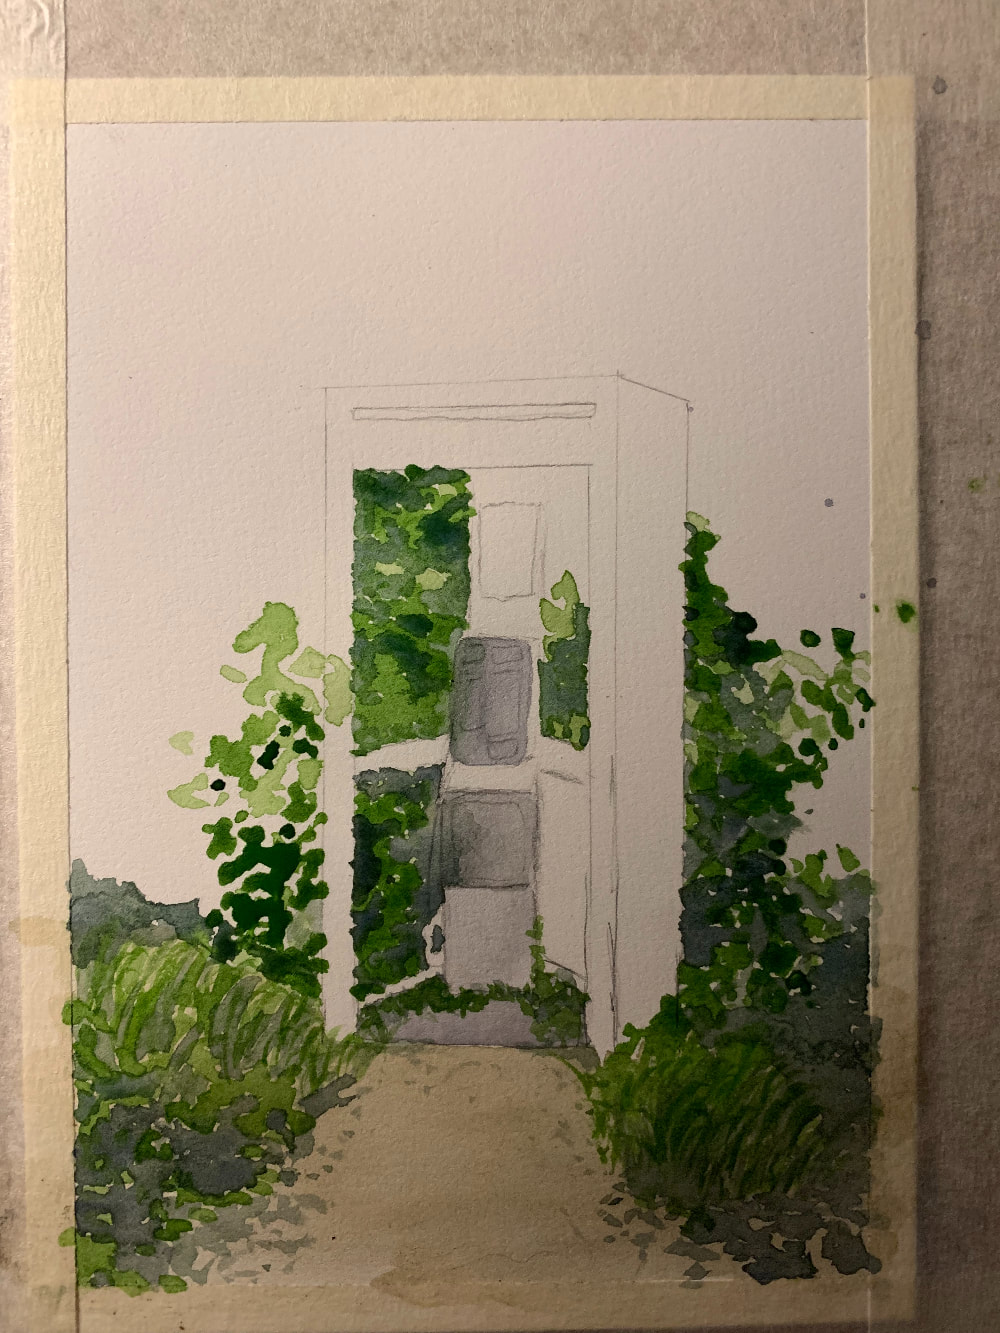 A watercolor painting of an abandoned telephone booth surrounded by greenery. The painting is in progress and about a third of the way done. 